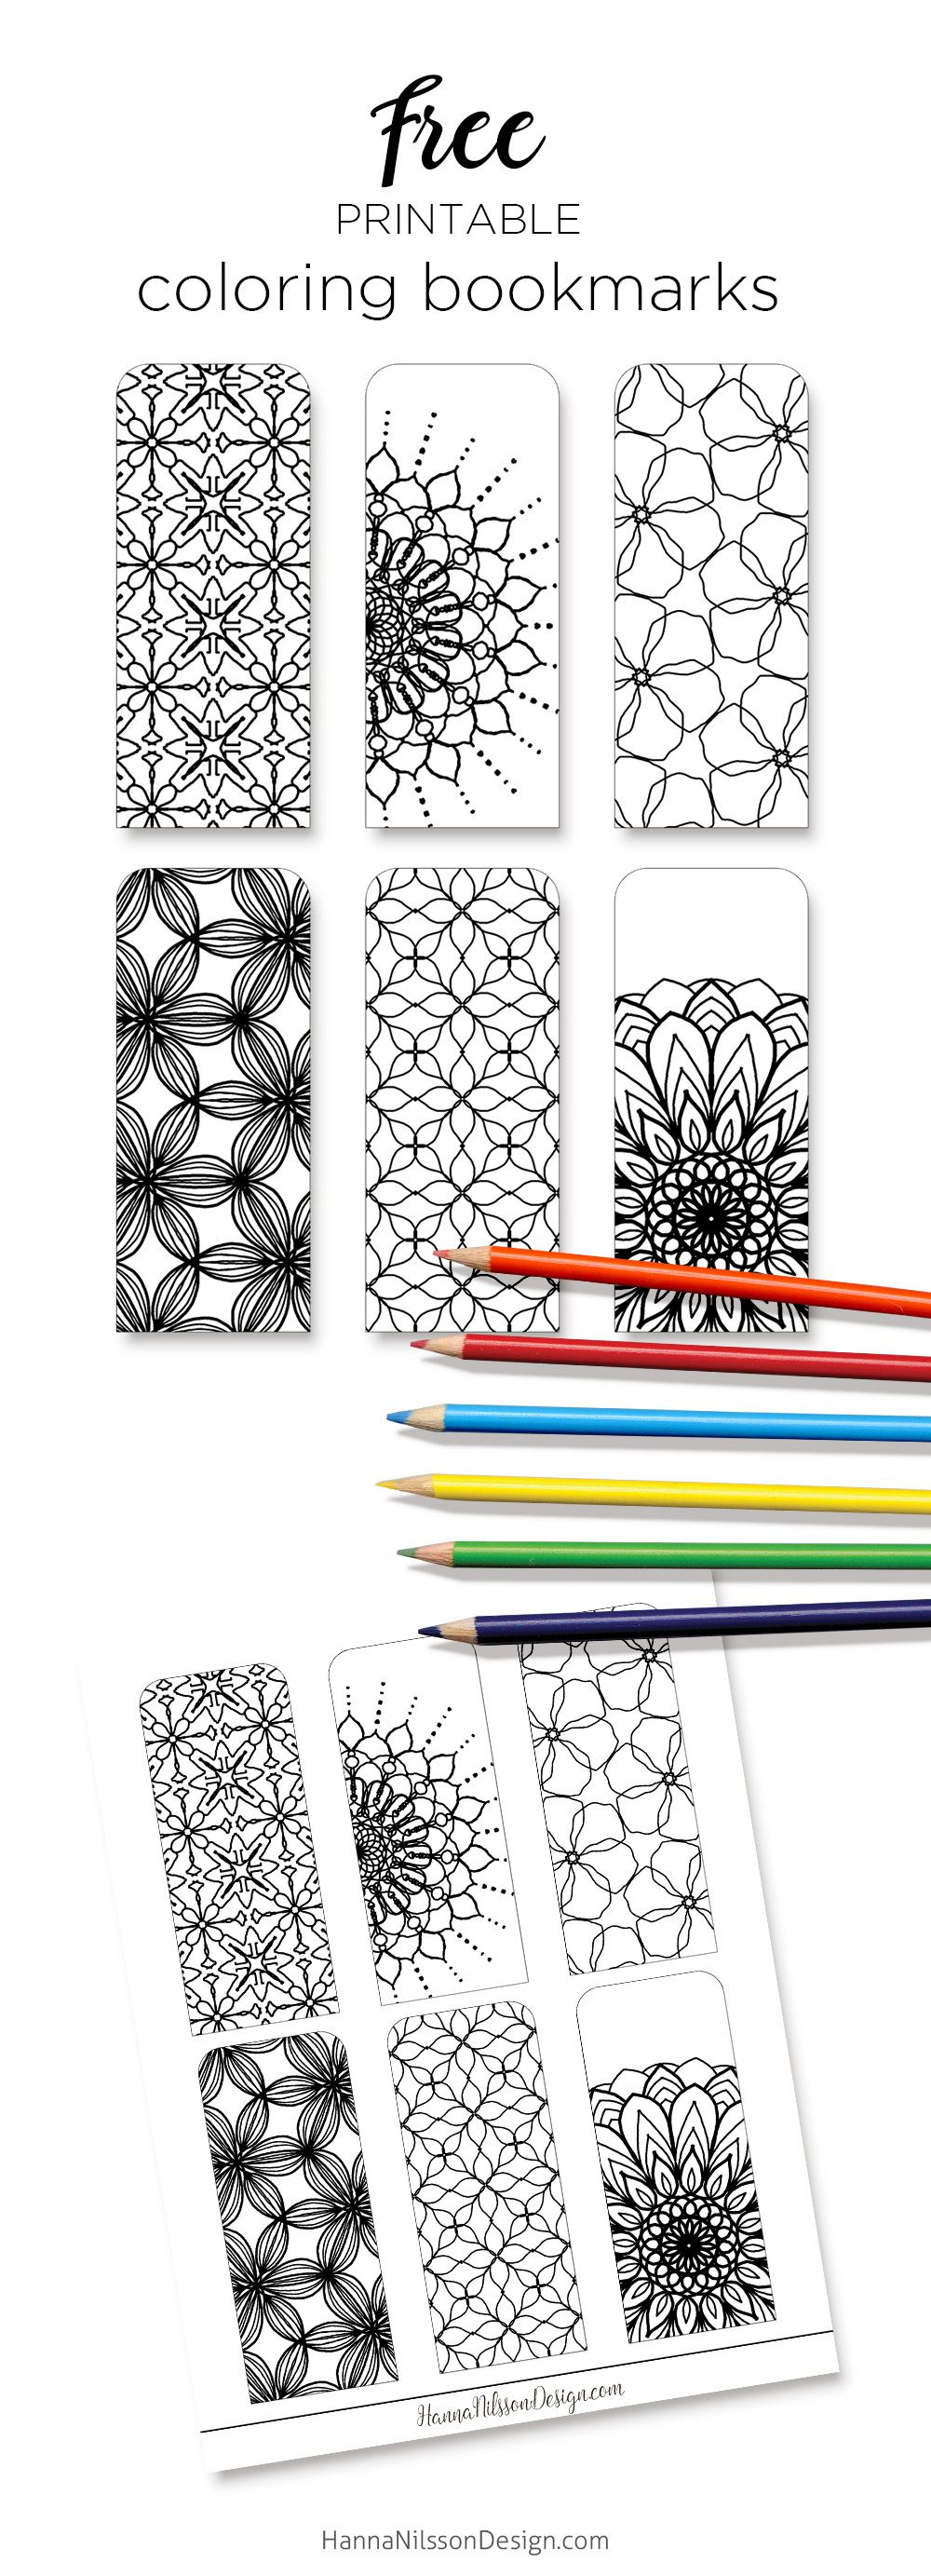 Coloring Bookmarks – Print, Color And Read | Printables | Bookmark - Free Printable Bookmarks To Color